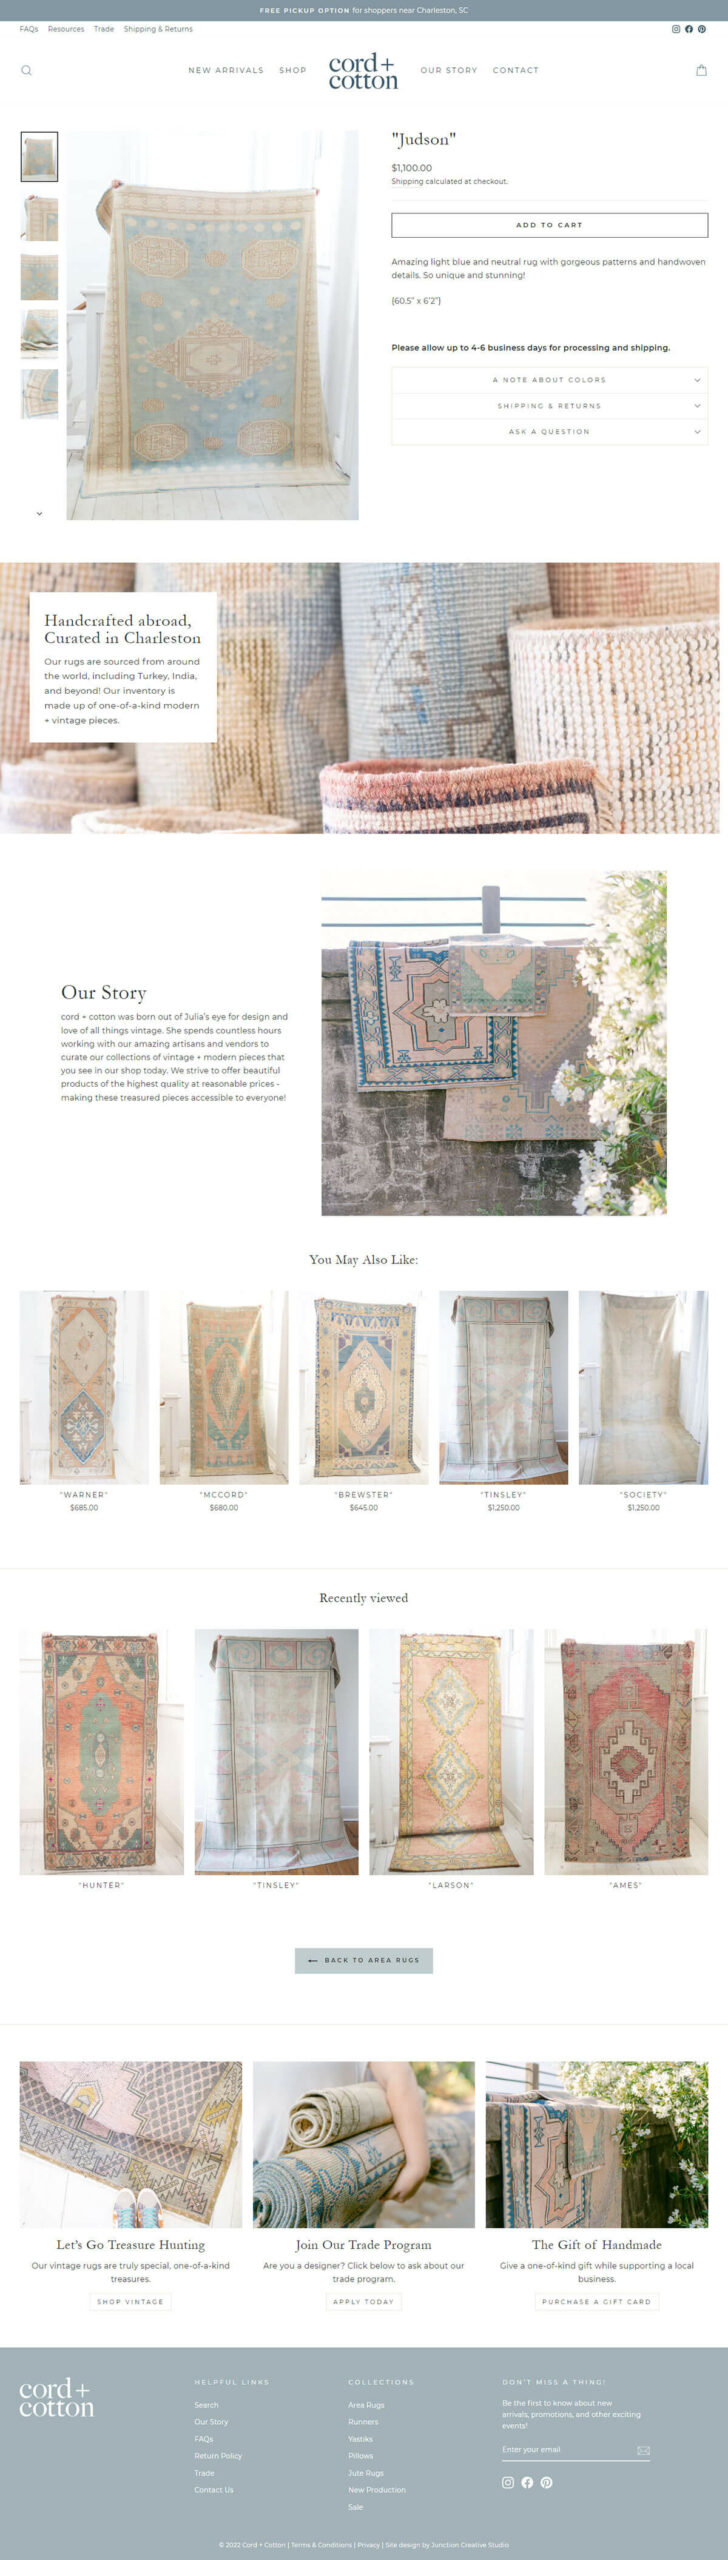 cord+cotton-product-page-design